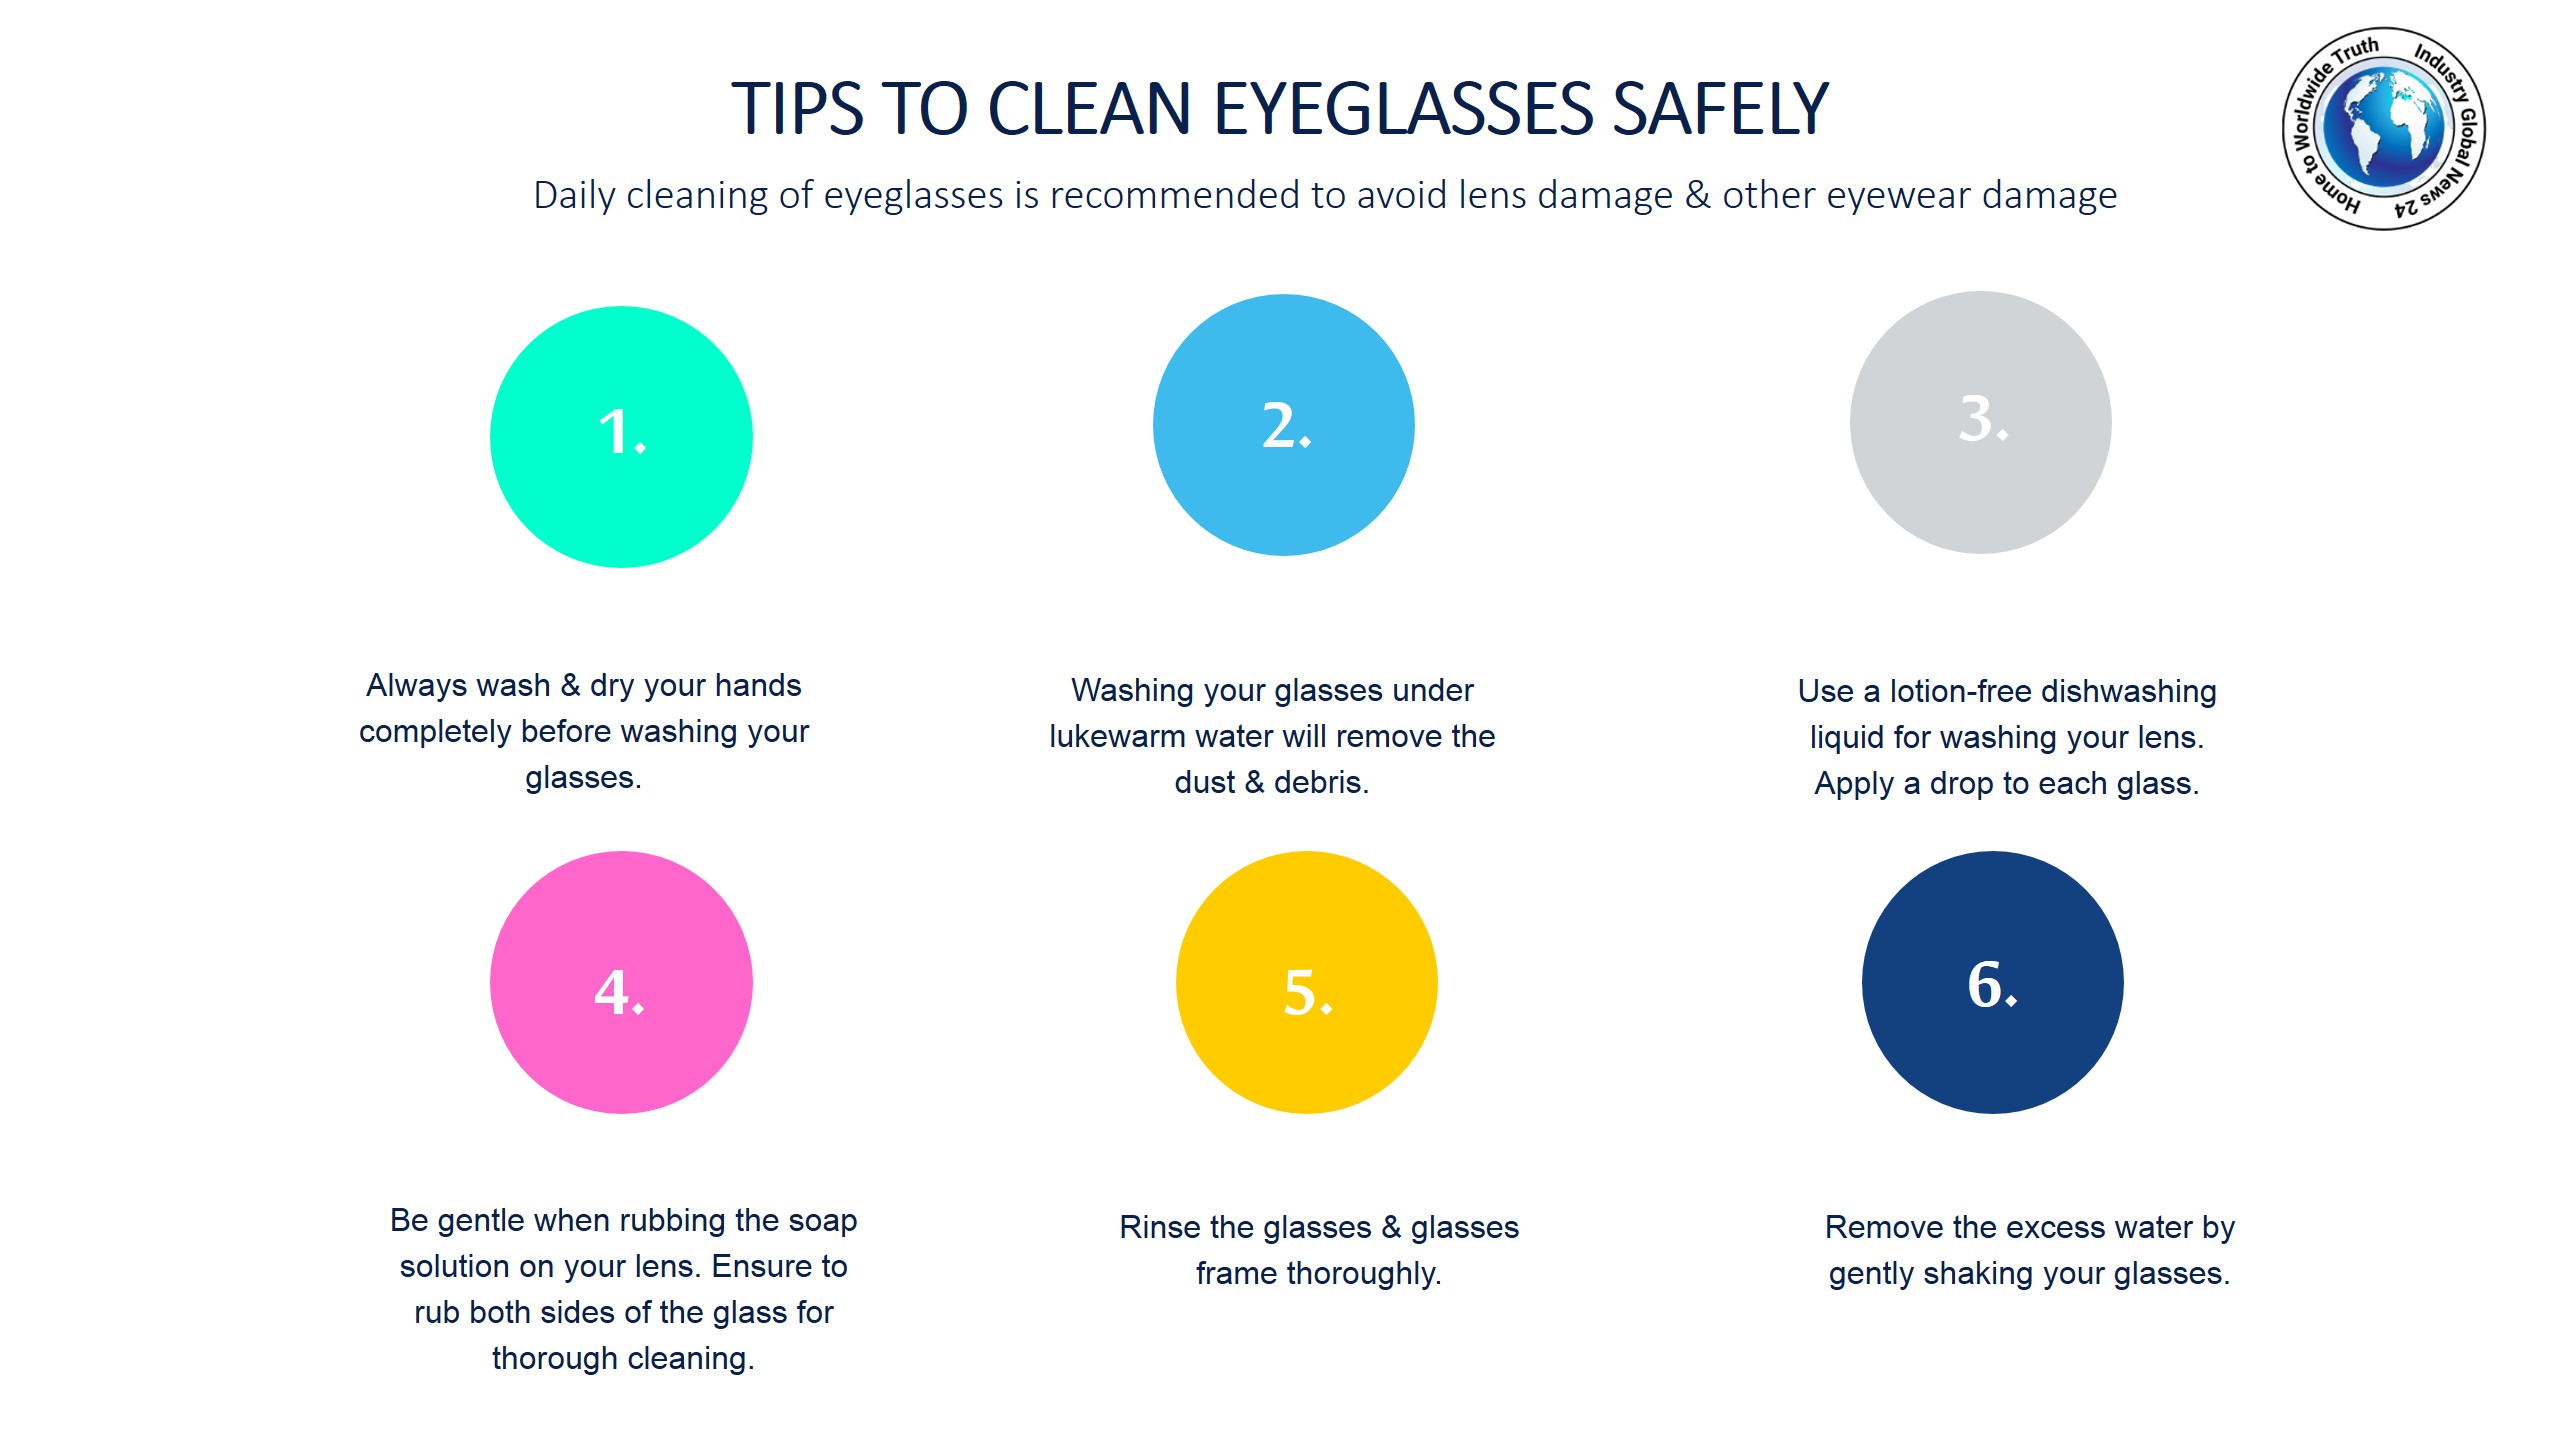 Tips to clean eyeglasses safely